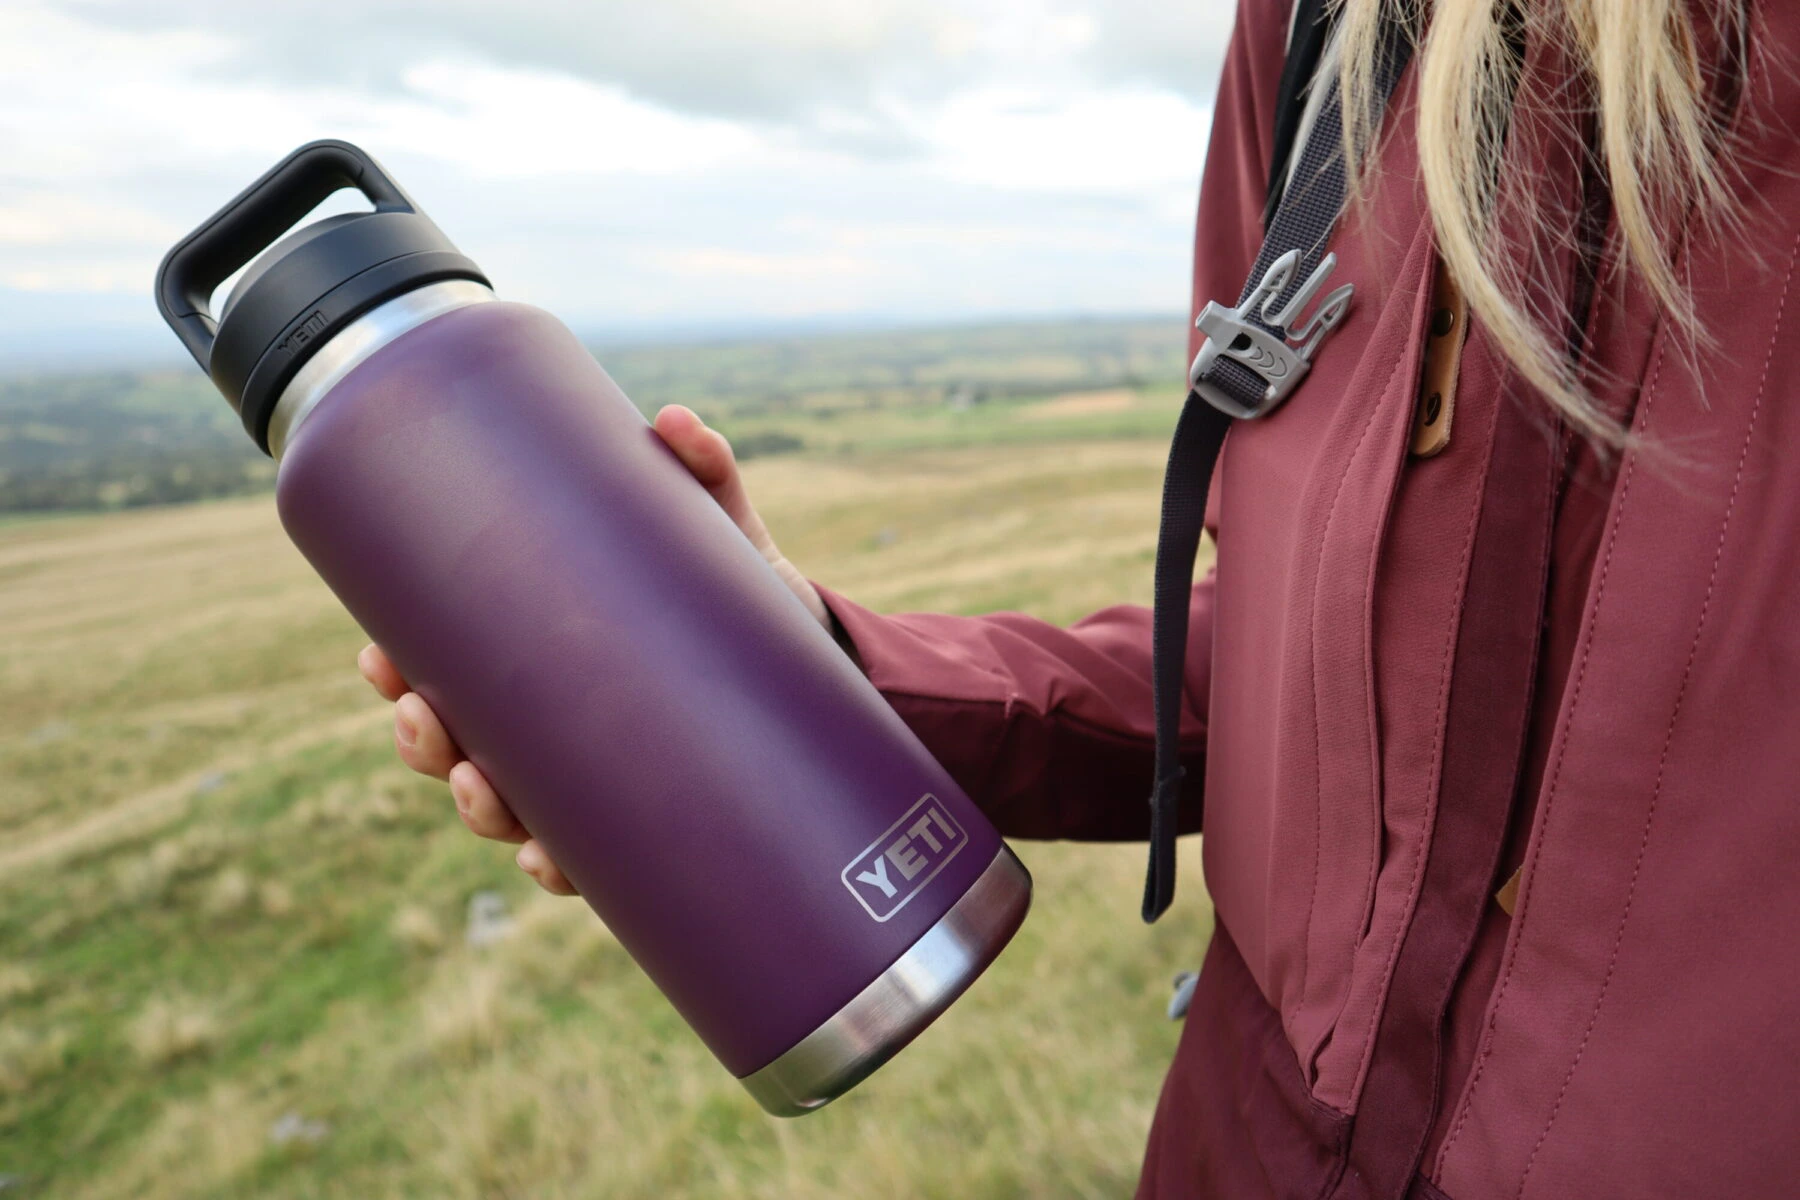 1.2L Stainless Steel Flask Insulated Vacuum Thermos Camping Hiking Hot Cold